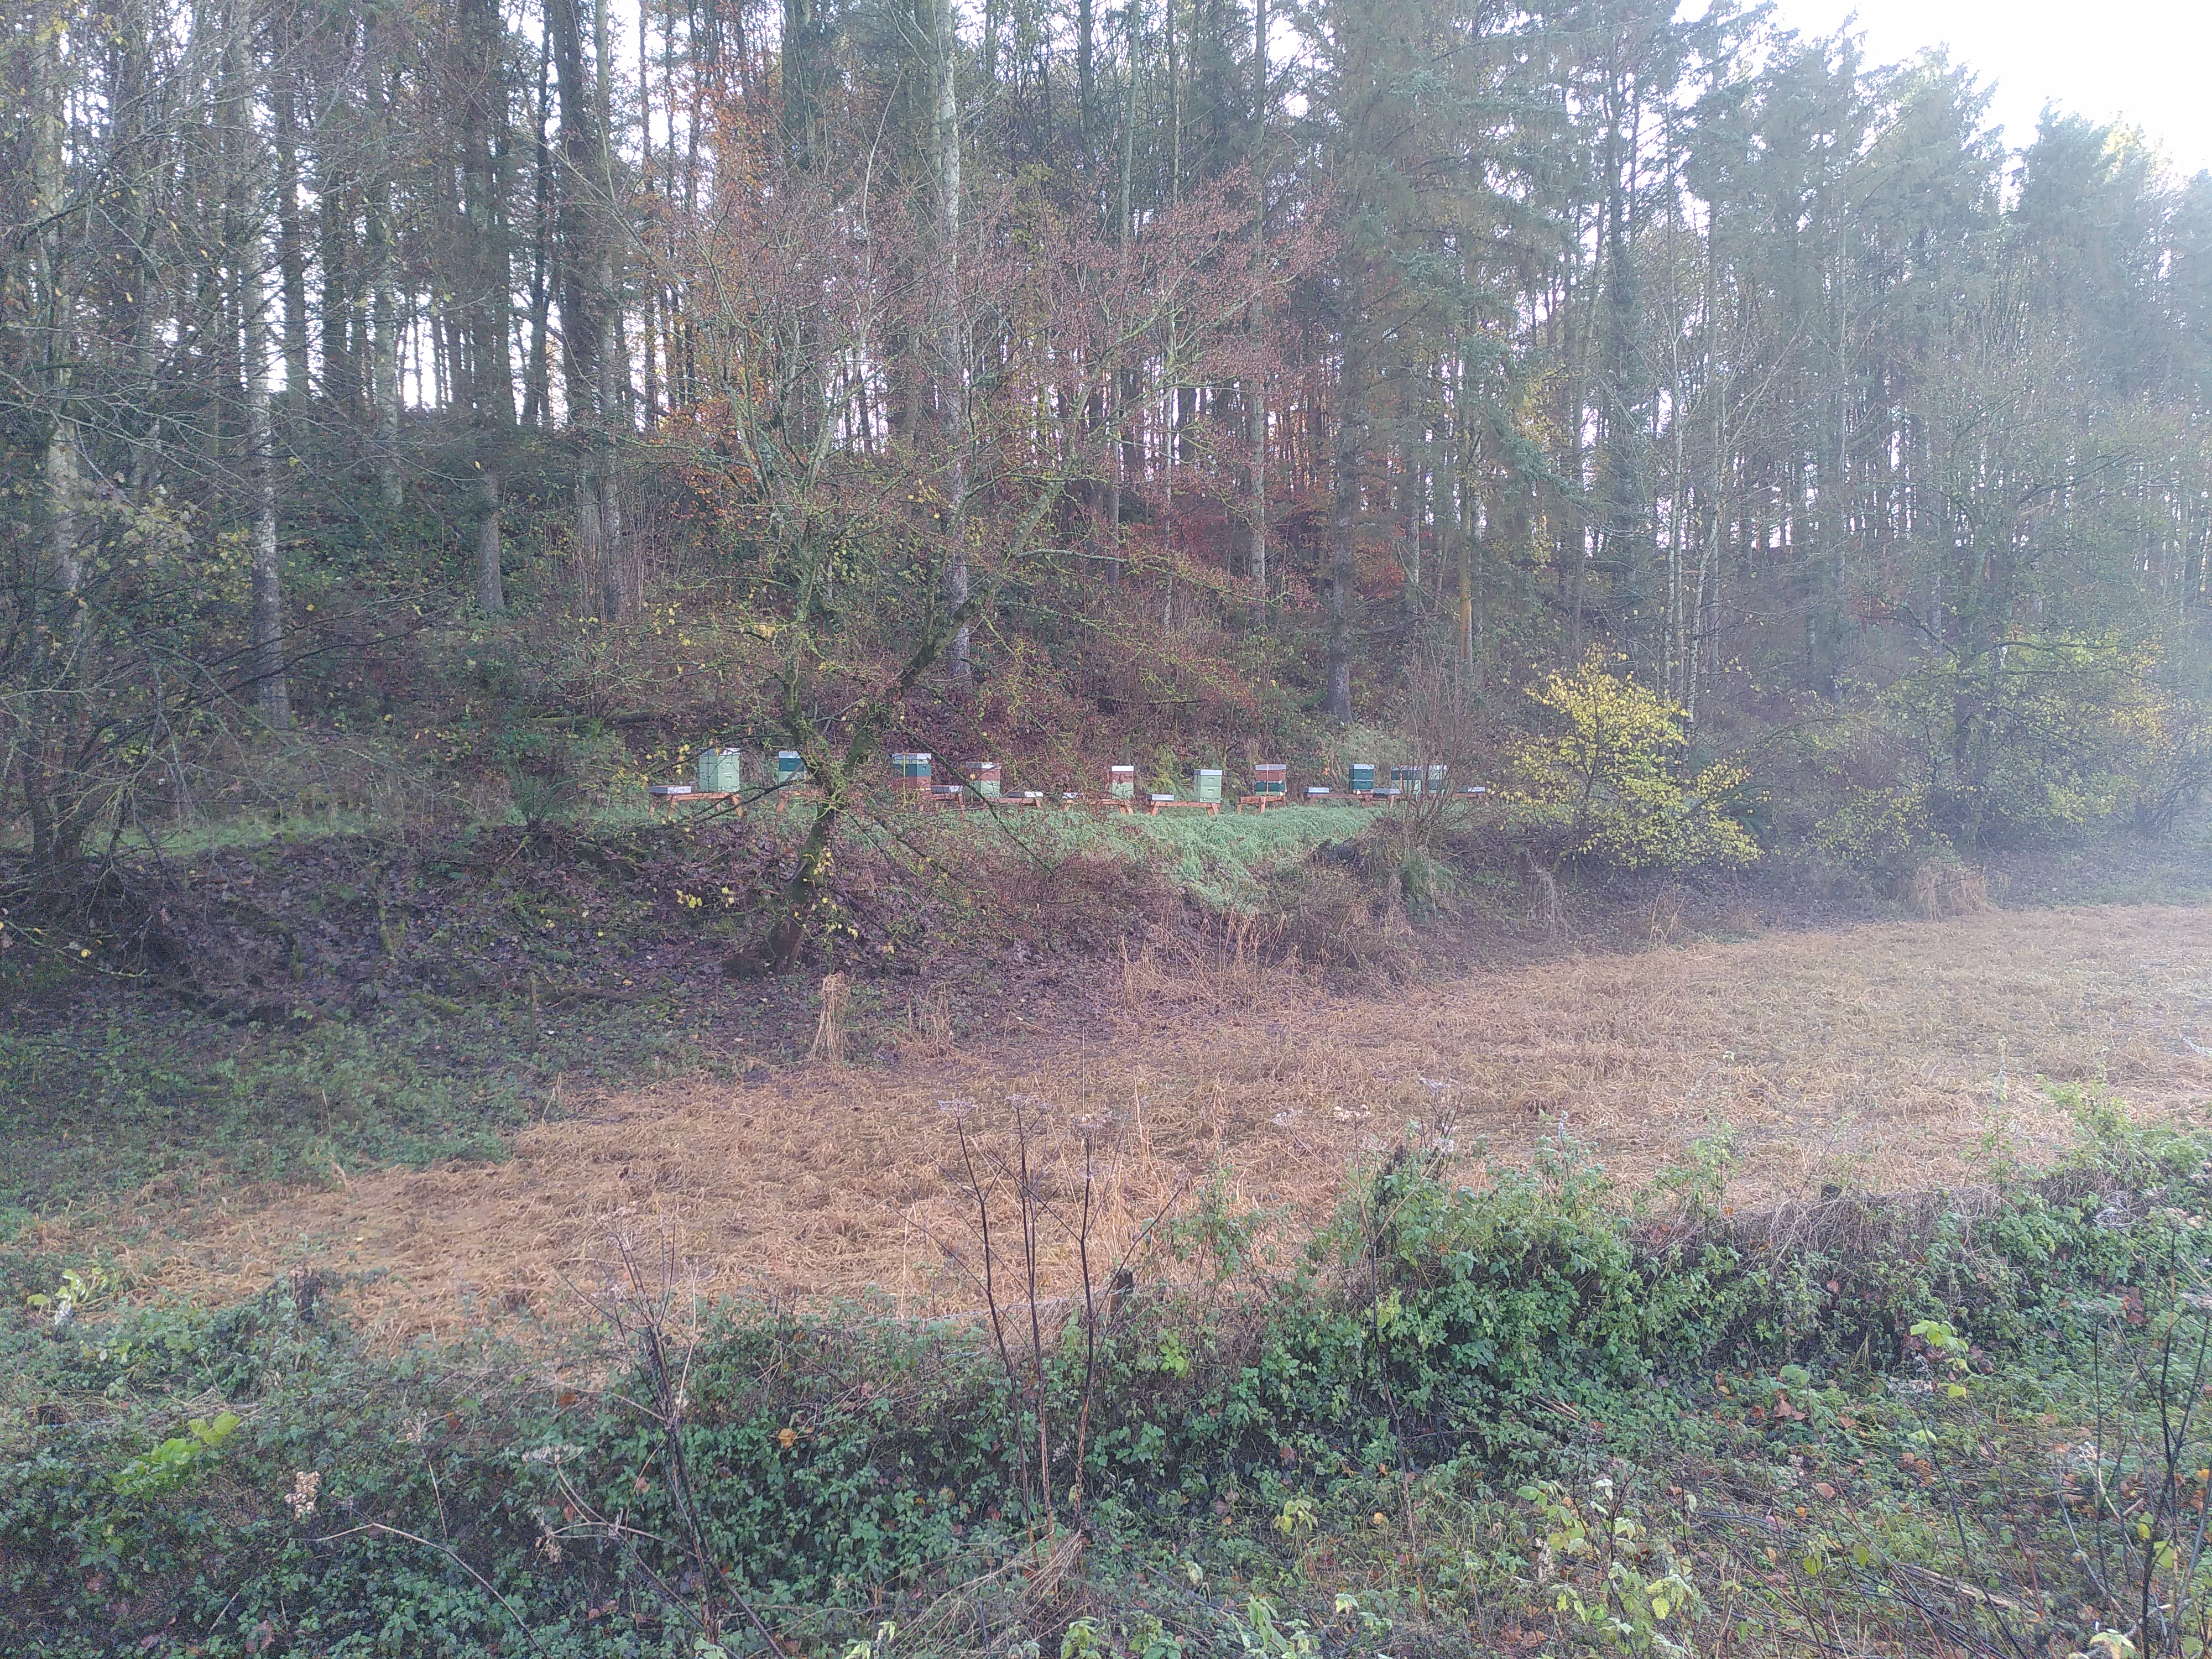 hives at the overwintering apiary